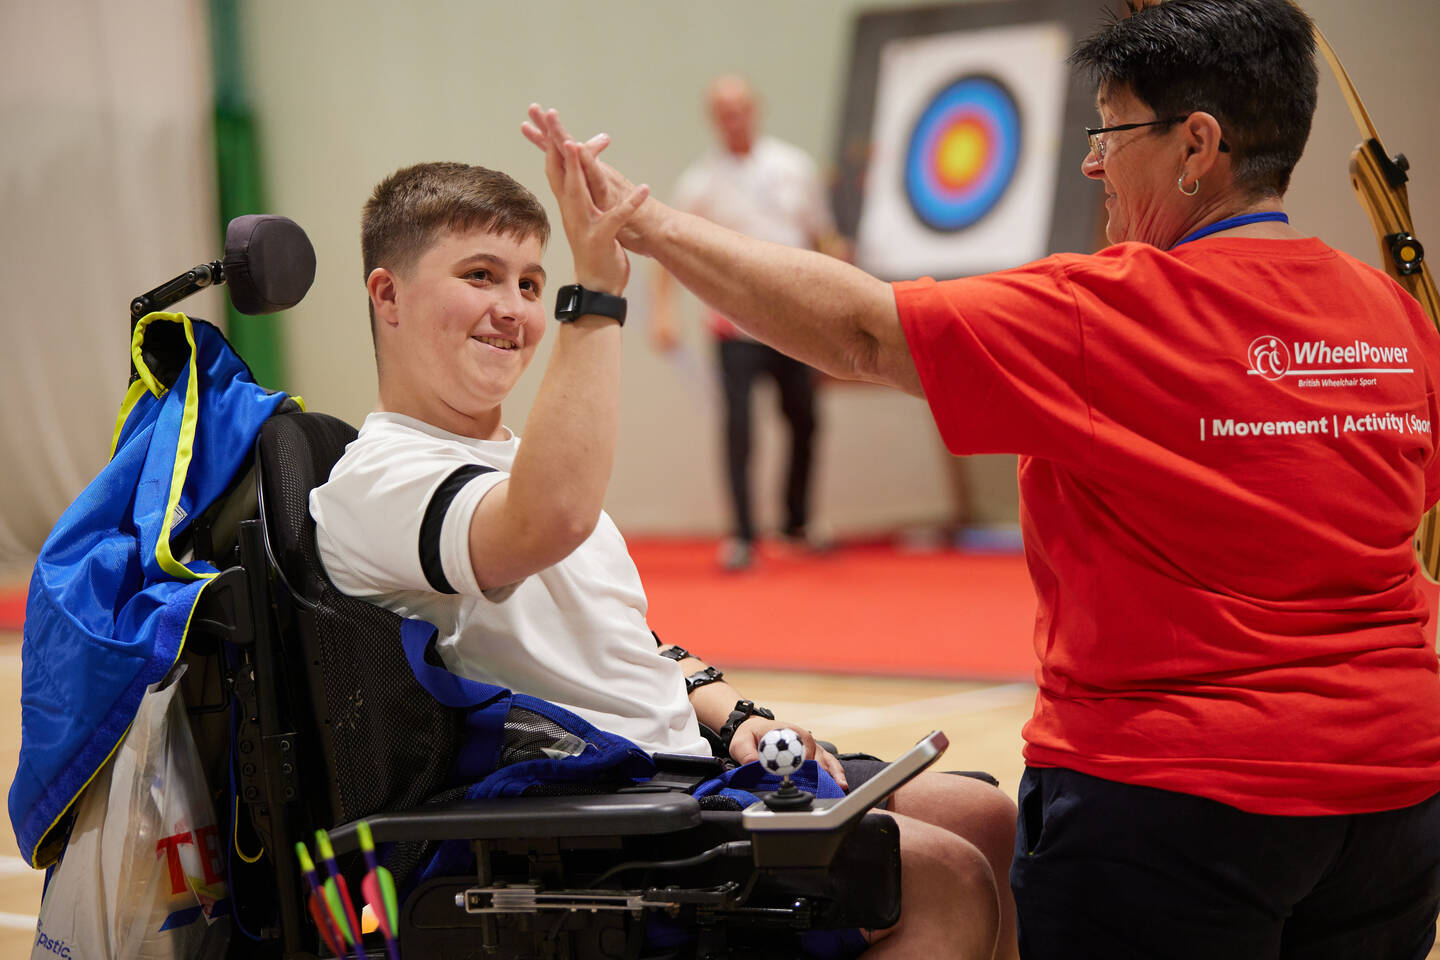 A young man in an electric wheelchair is taking part in the Wheelpower Junior Games. He is being 'high-fived' by a coach.